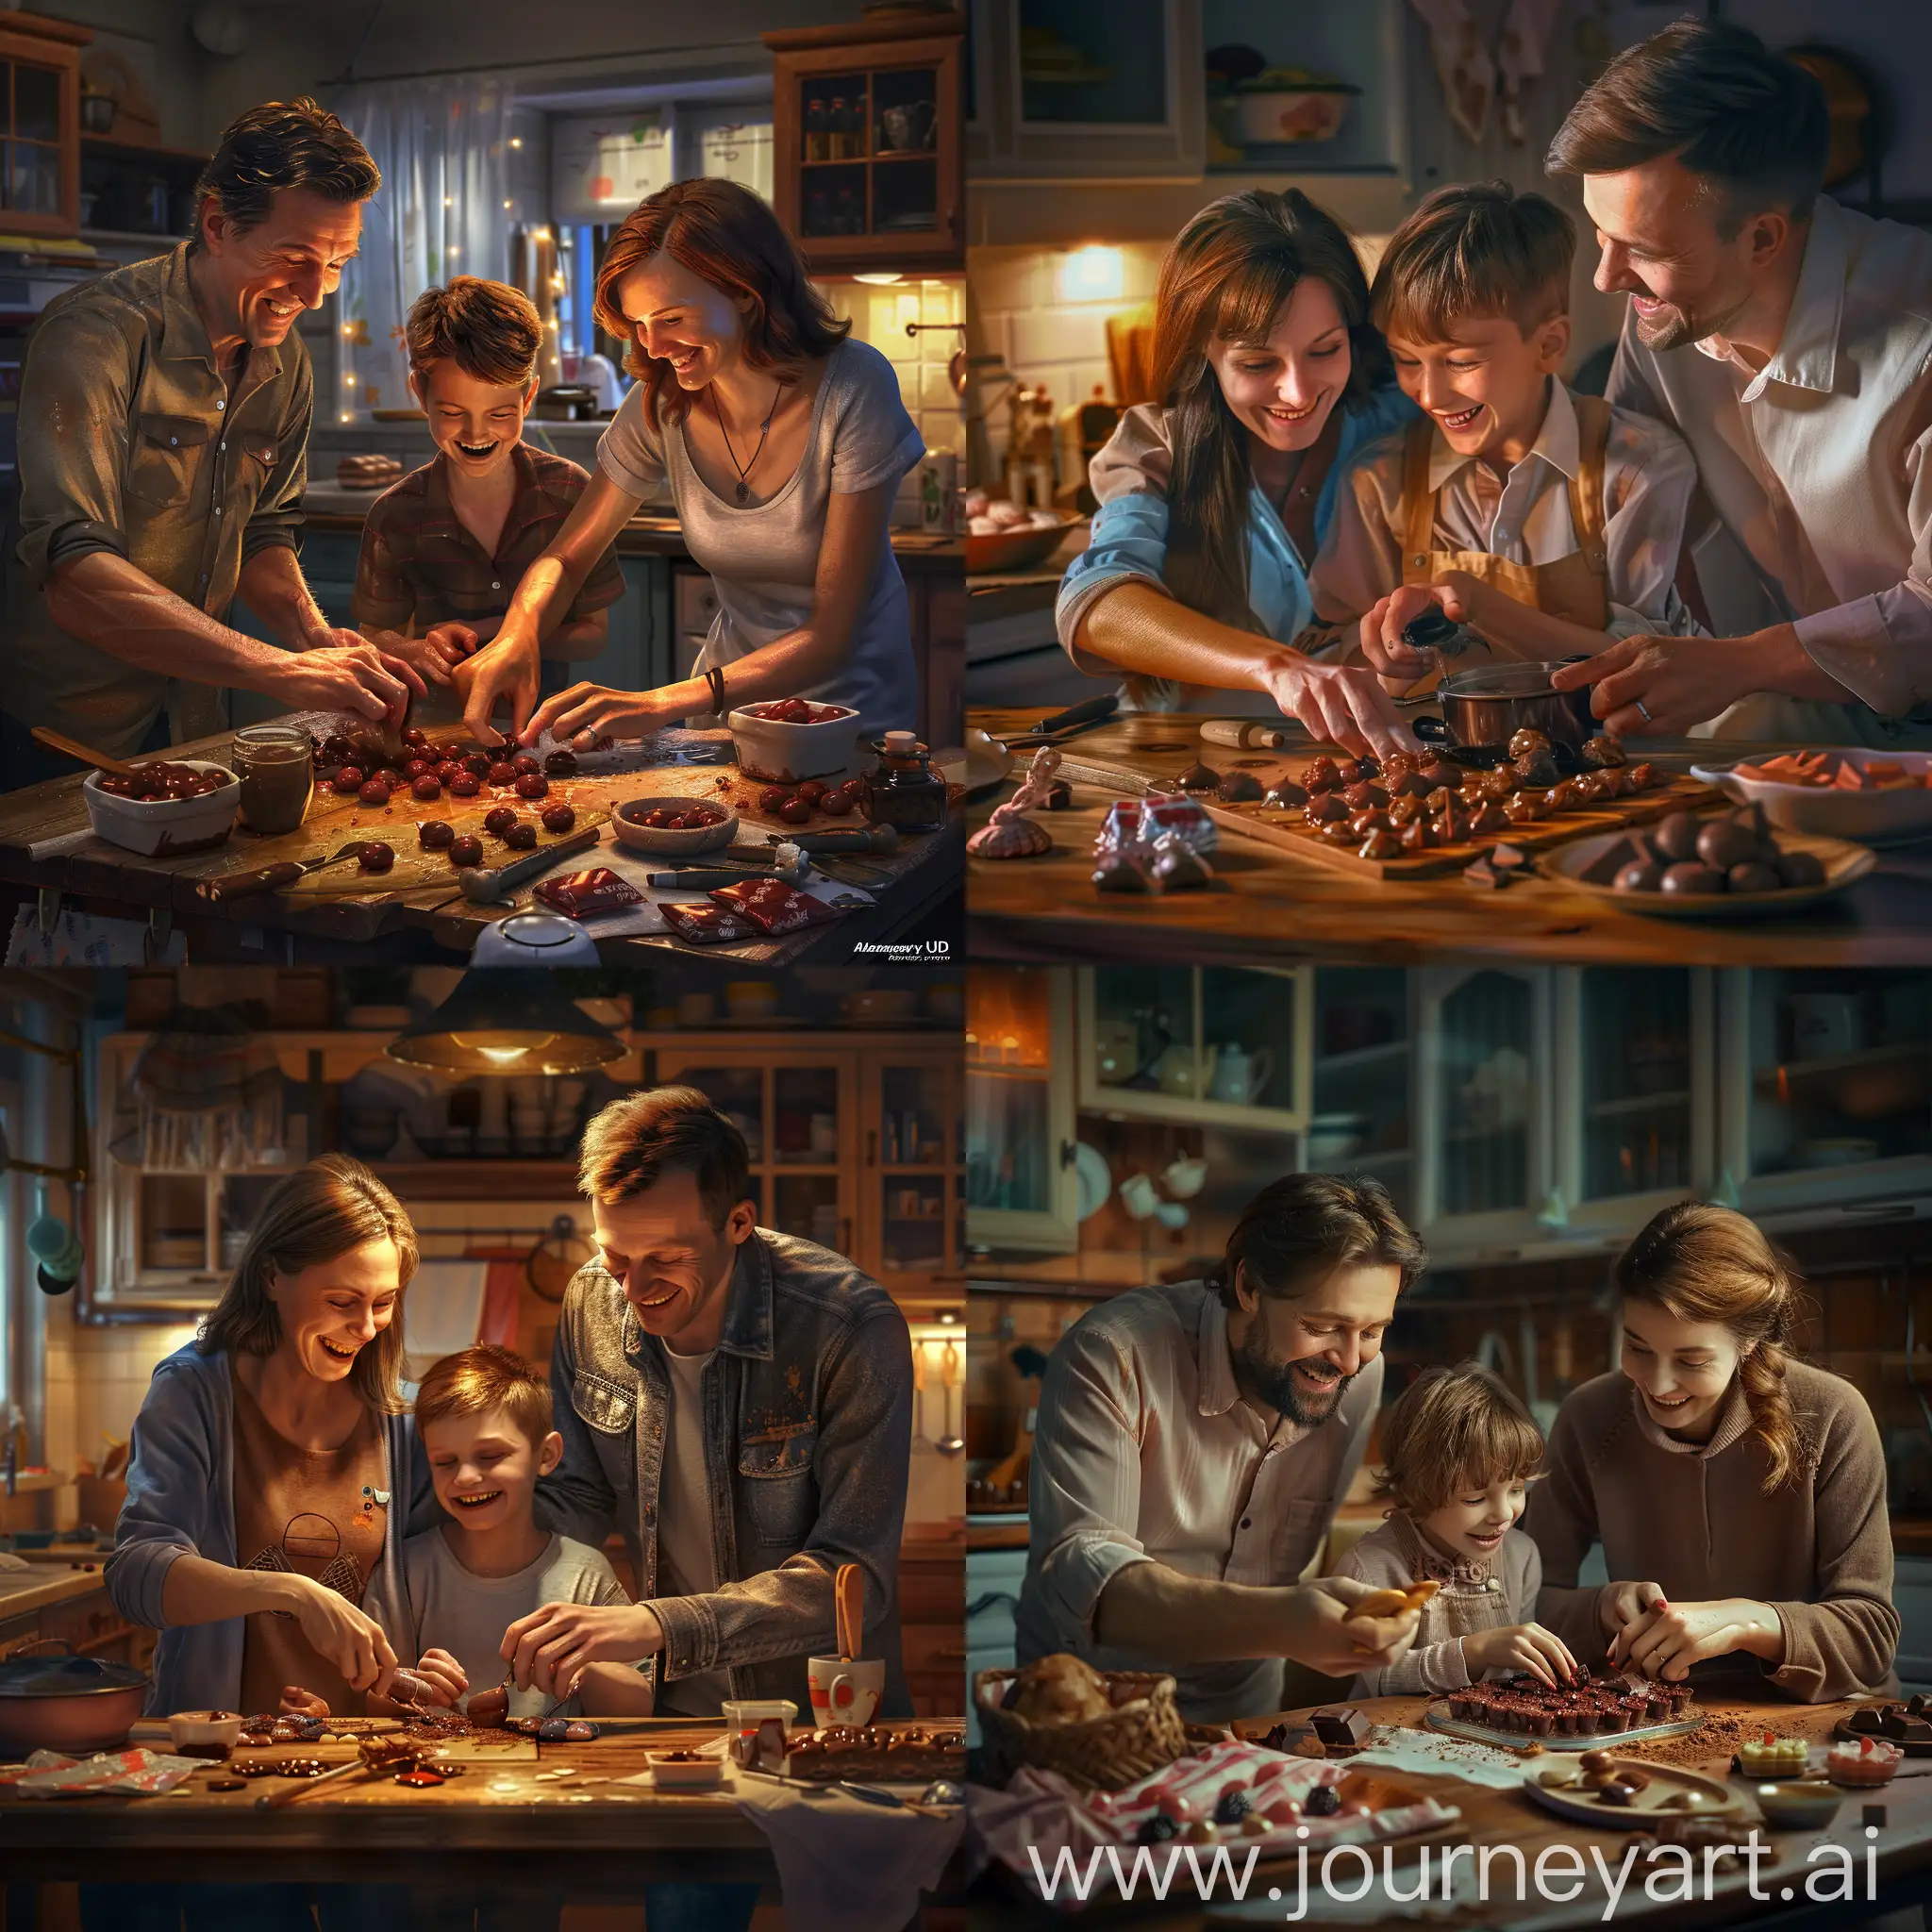 Happy-Russian-Family-Making-Homemade-Candies-in-Cozy-Kitchen-Setting